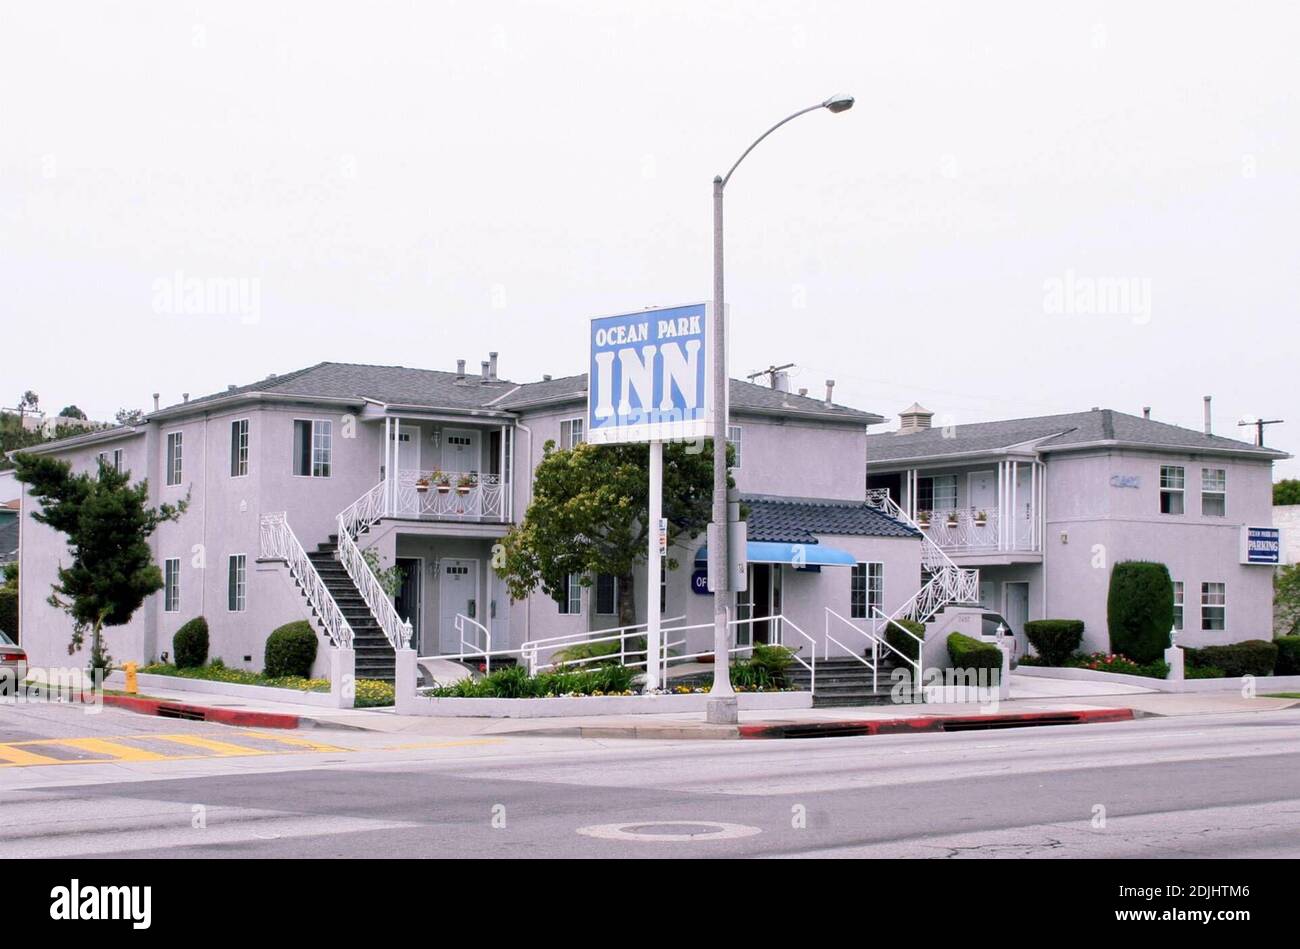 The Ocean Park Inn in Santa Monica, Ca. where Daniel Baldwin was arrested on April 22nd for investigation of cocaine possession. The actor will not face felony charges according to authorities. After reviewing the case, the Los Angeles County district attorney's office referred the matter to the city attorney's office in Santa Monica for consideration of misdemeanor charges following the arrest during which a small amount of cocaine and drug paraphernalia were found in the motel room. 4/29/06 Stock Photo